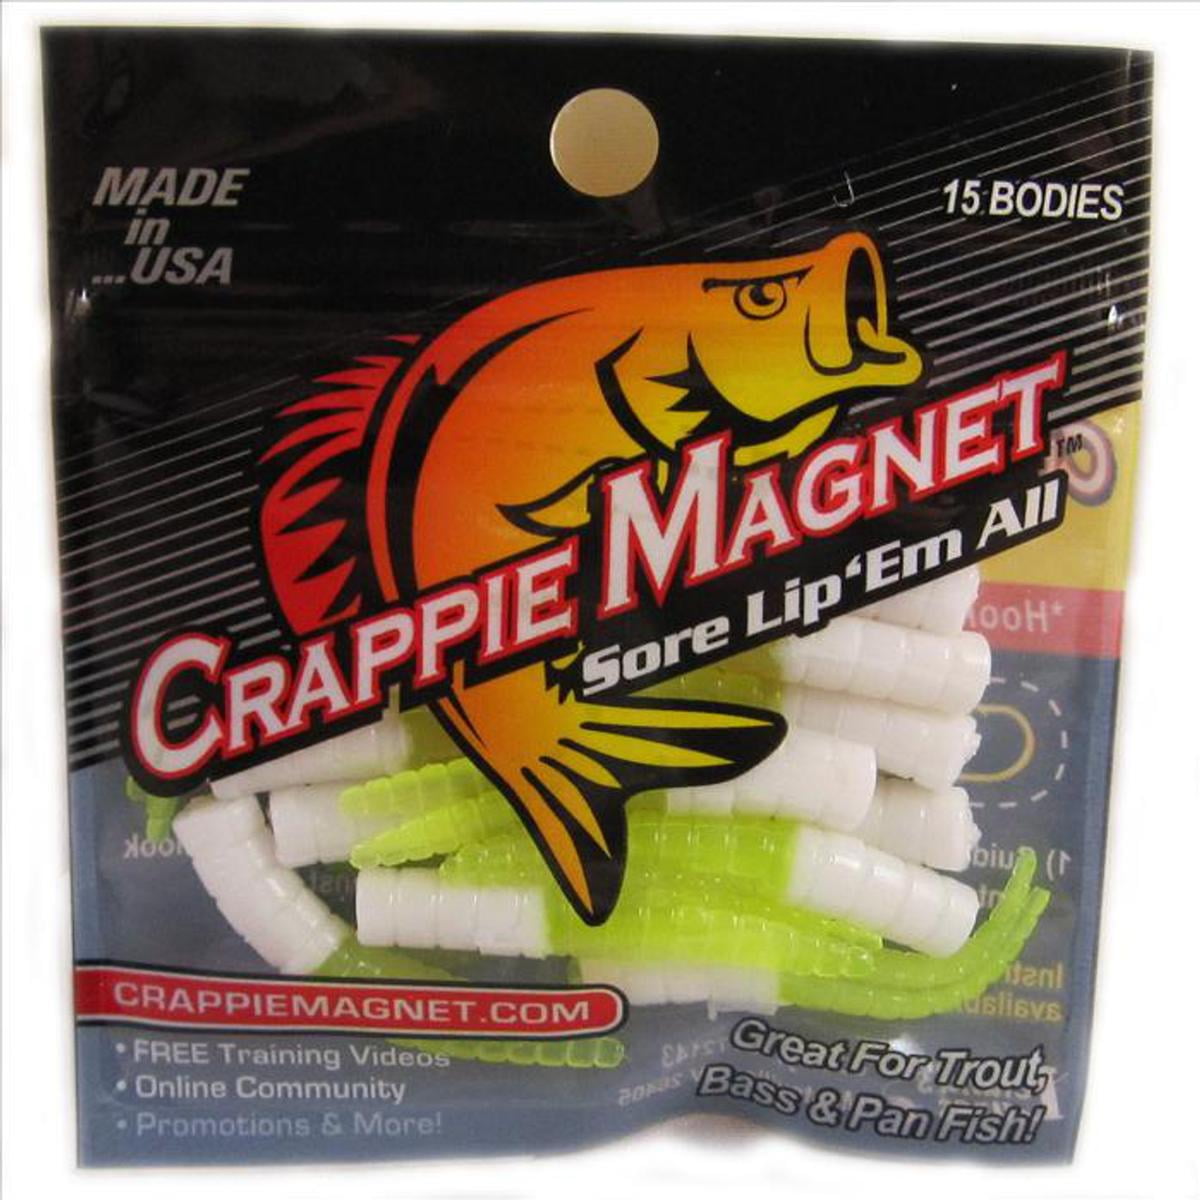 Leland Lures Crappie Magnets 2 packs 30 pc total black/chart 